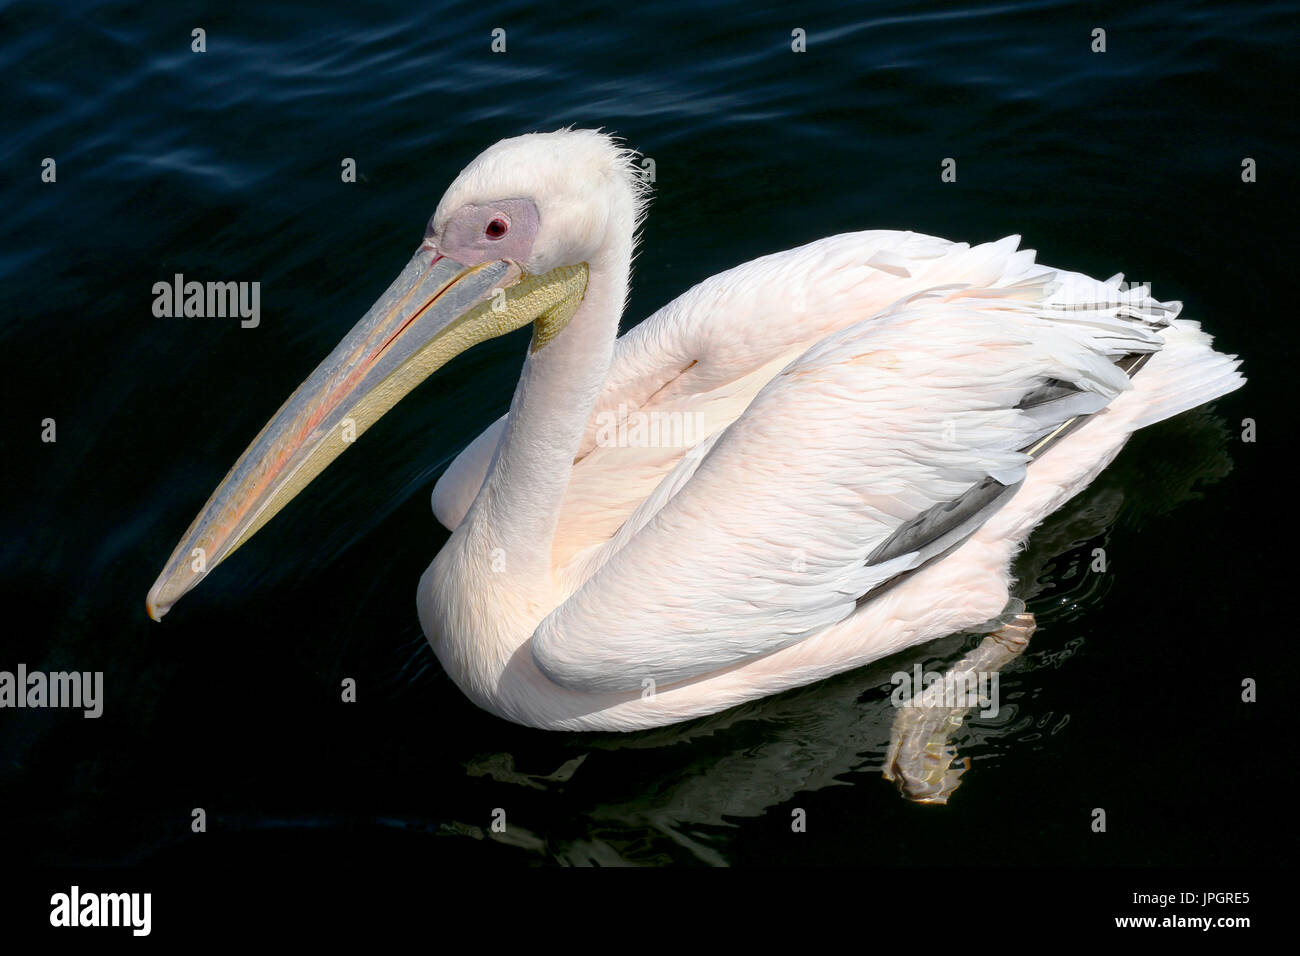 Great White Pelicans (Pelecanus onocrotalus) coming over, hoping to get fed with fish. They are washed with pink and yellow in breeding season. Stock Photo